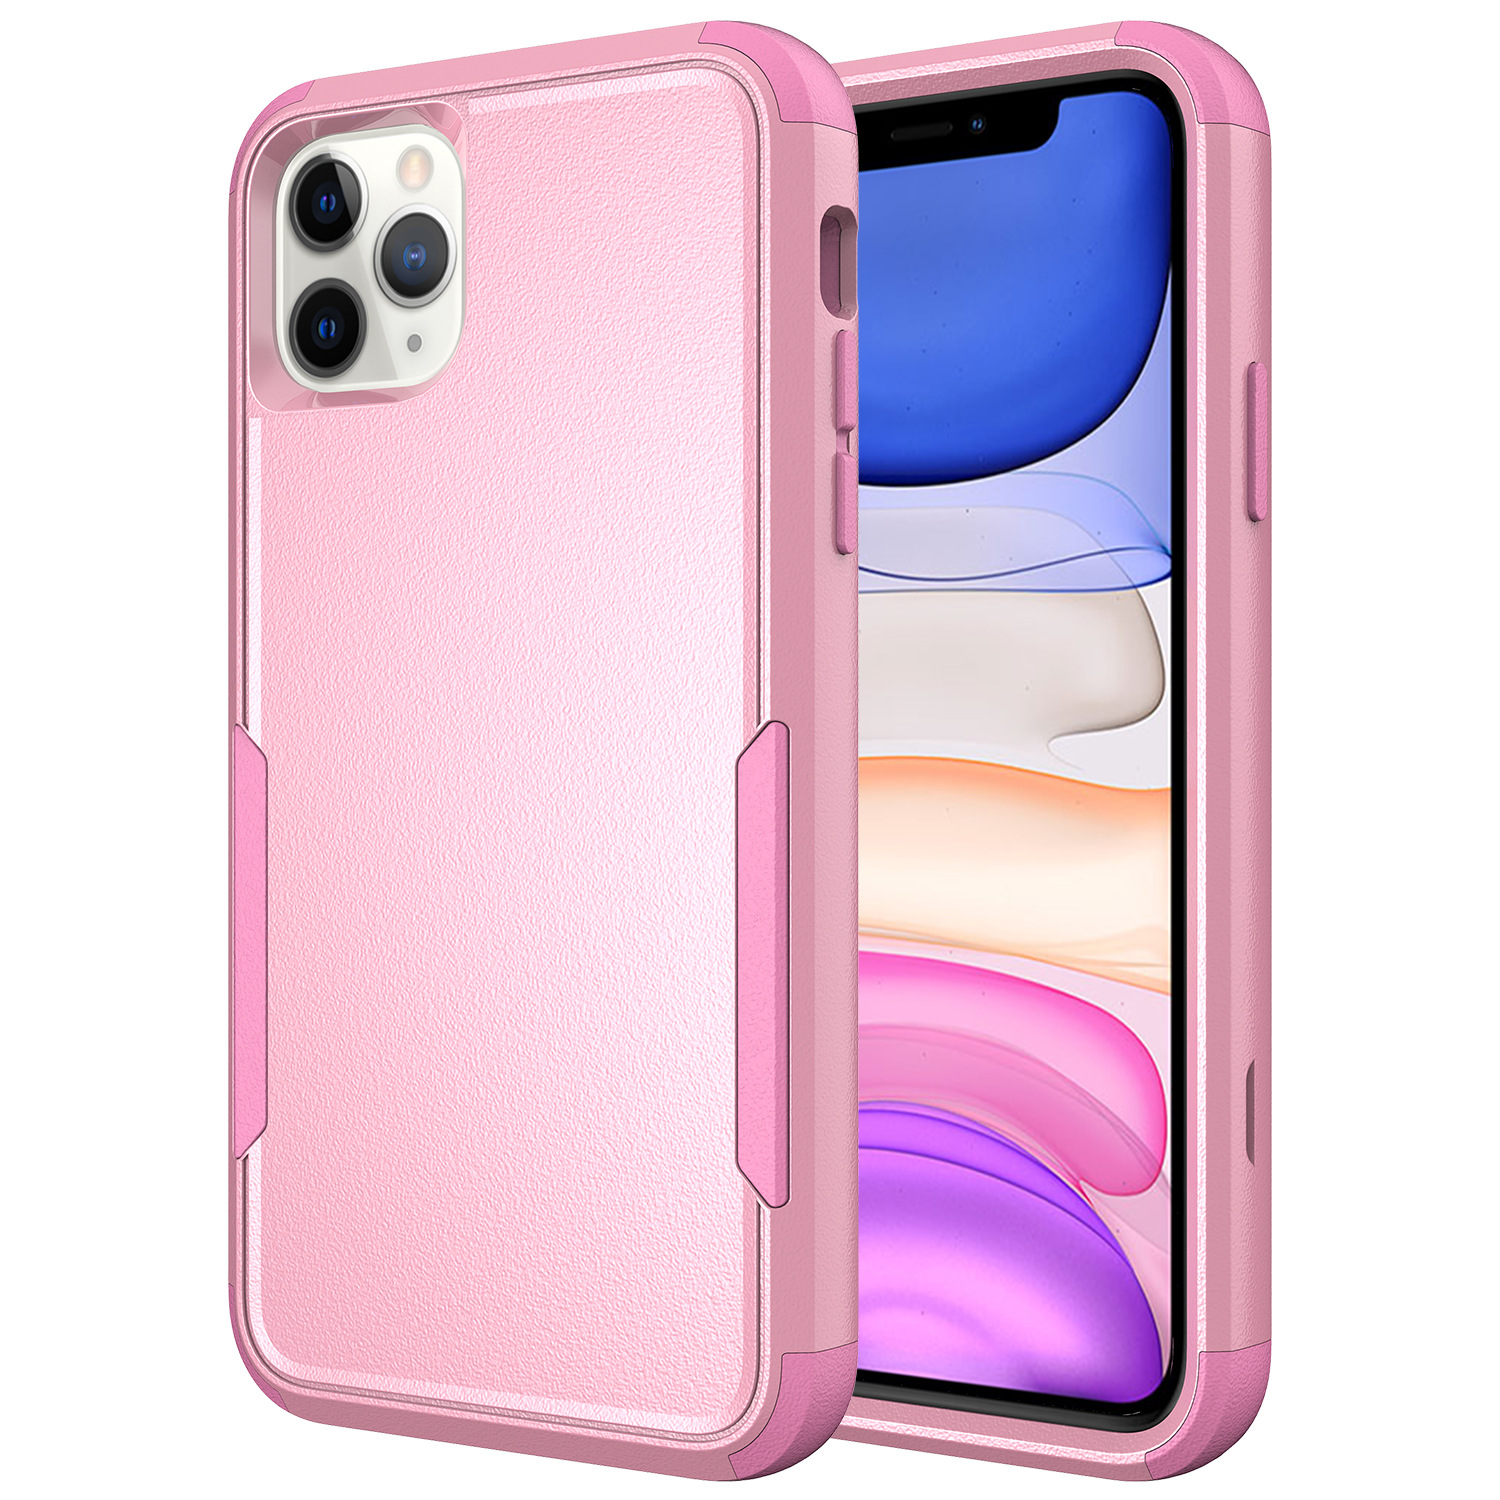 Heavy Duty Strong Armor Hybrid Case Cover for Apple iPHONE 12 Pro Max 6.7 (Pink)